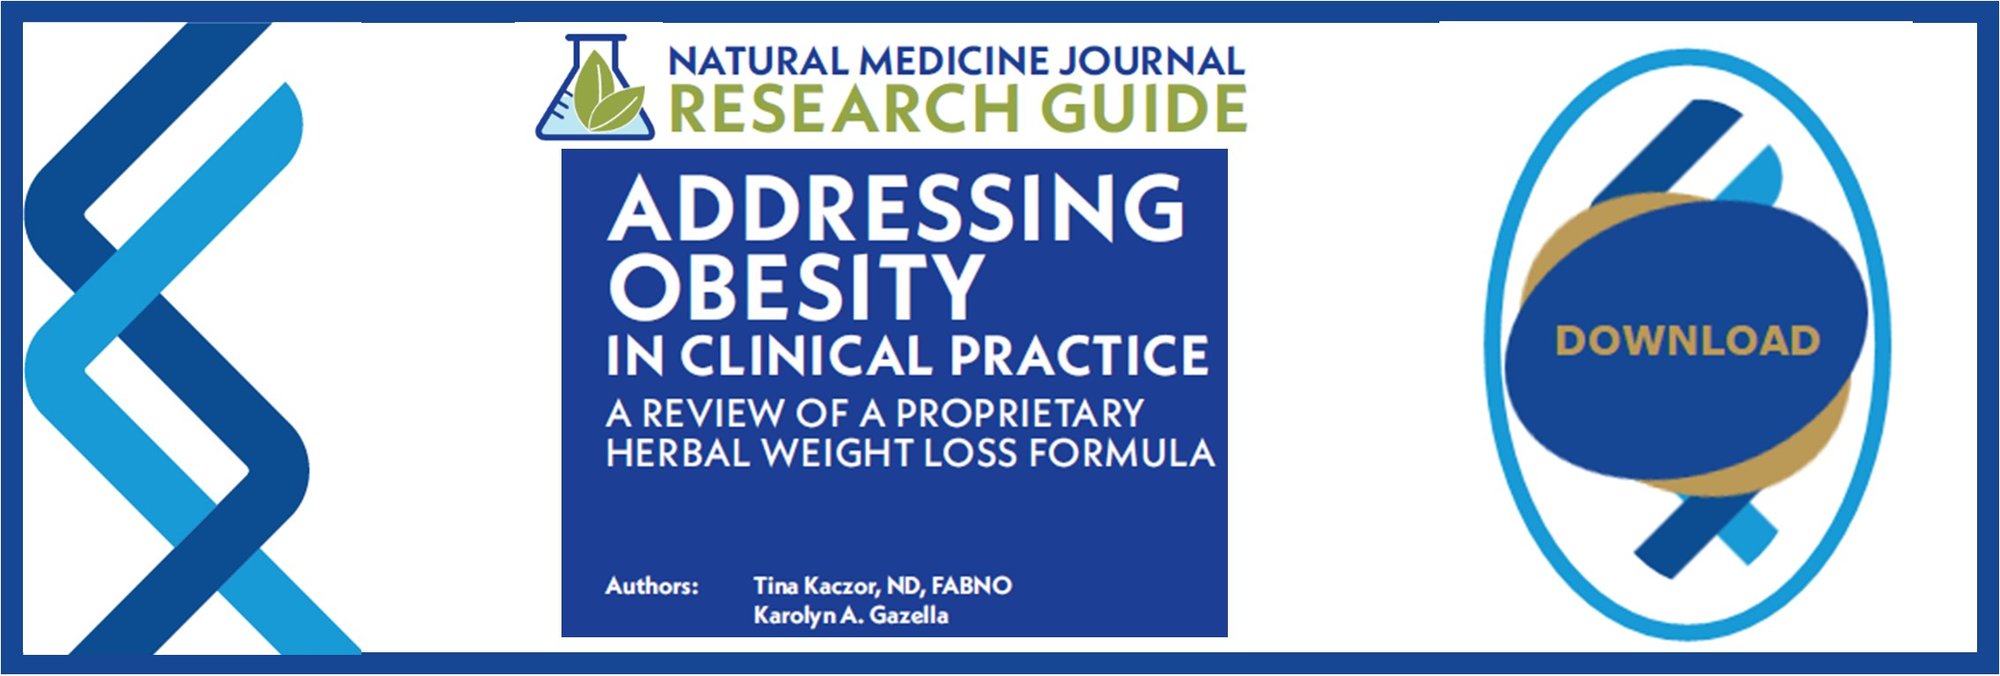 Downoad Addressing Obesity in Clinical Practice from The Natural Medicine Journal. A Research Guide